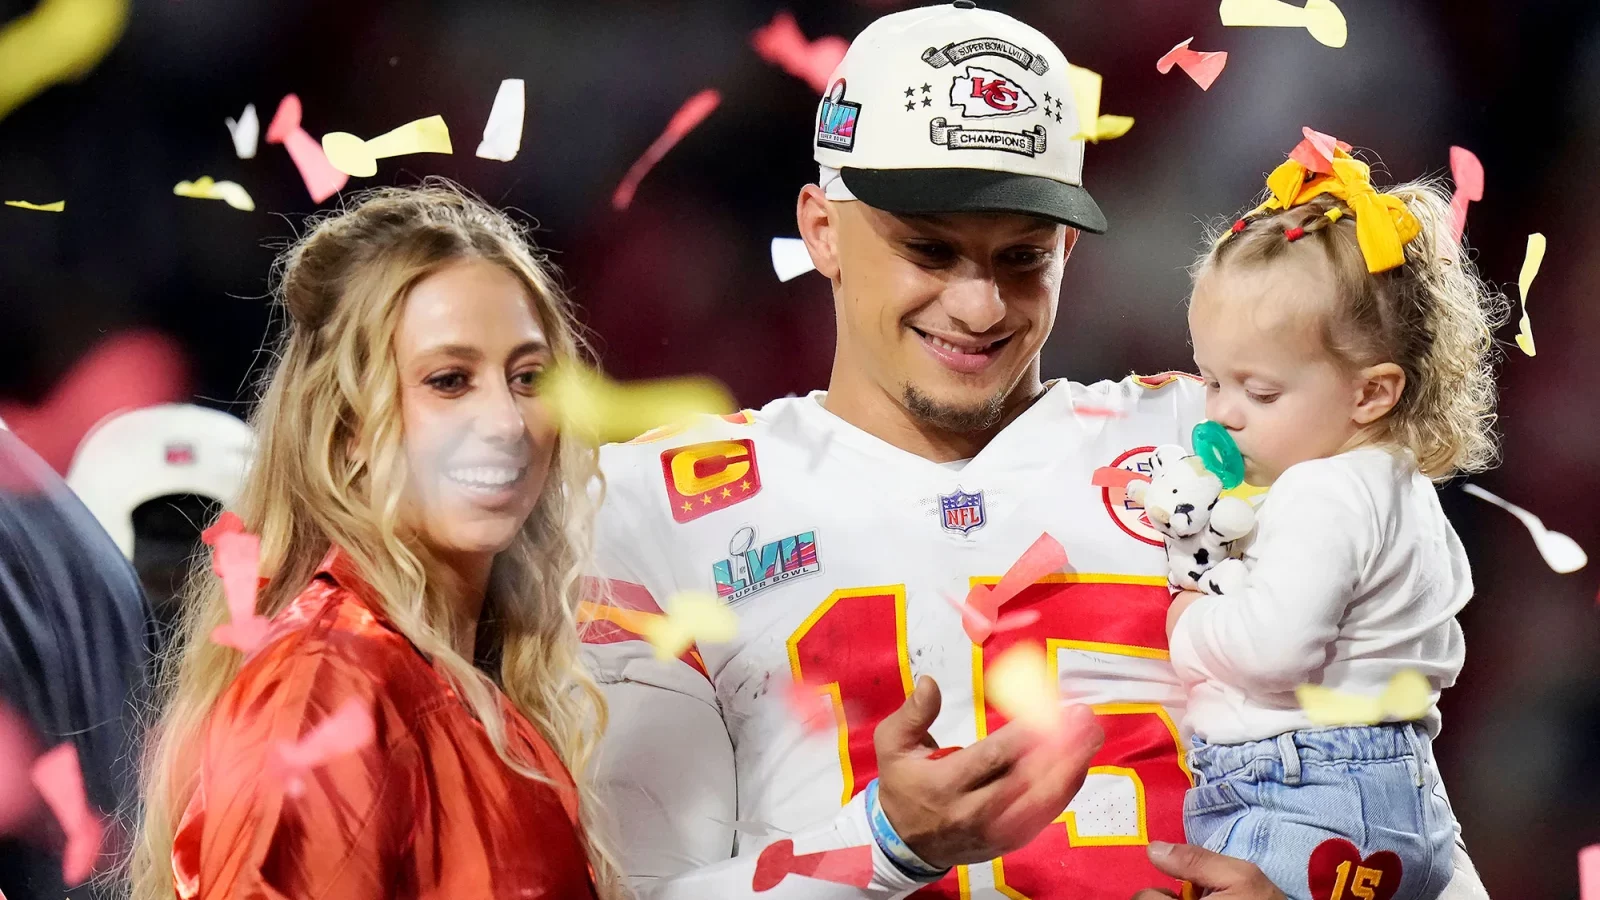 Patrick Mahomes Looks Beyond Second Super Bowl Win, Aims for Third Lombardy Trophy